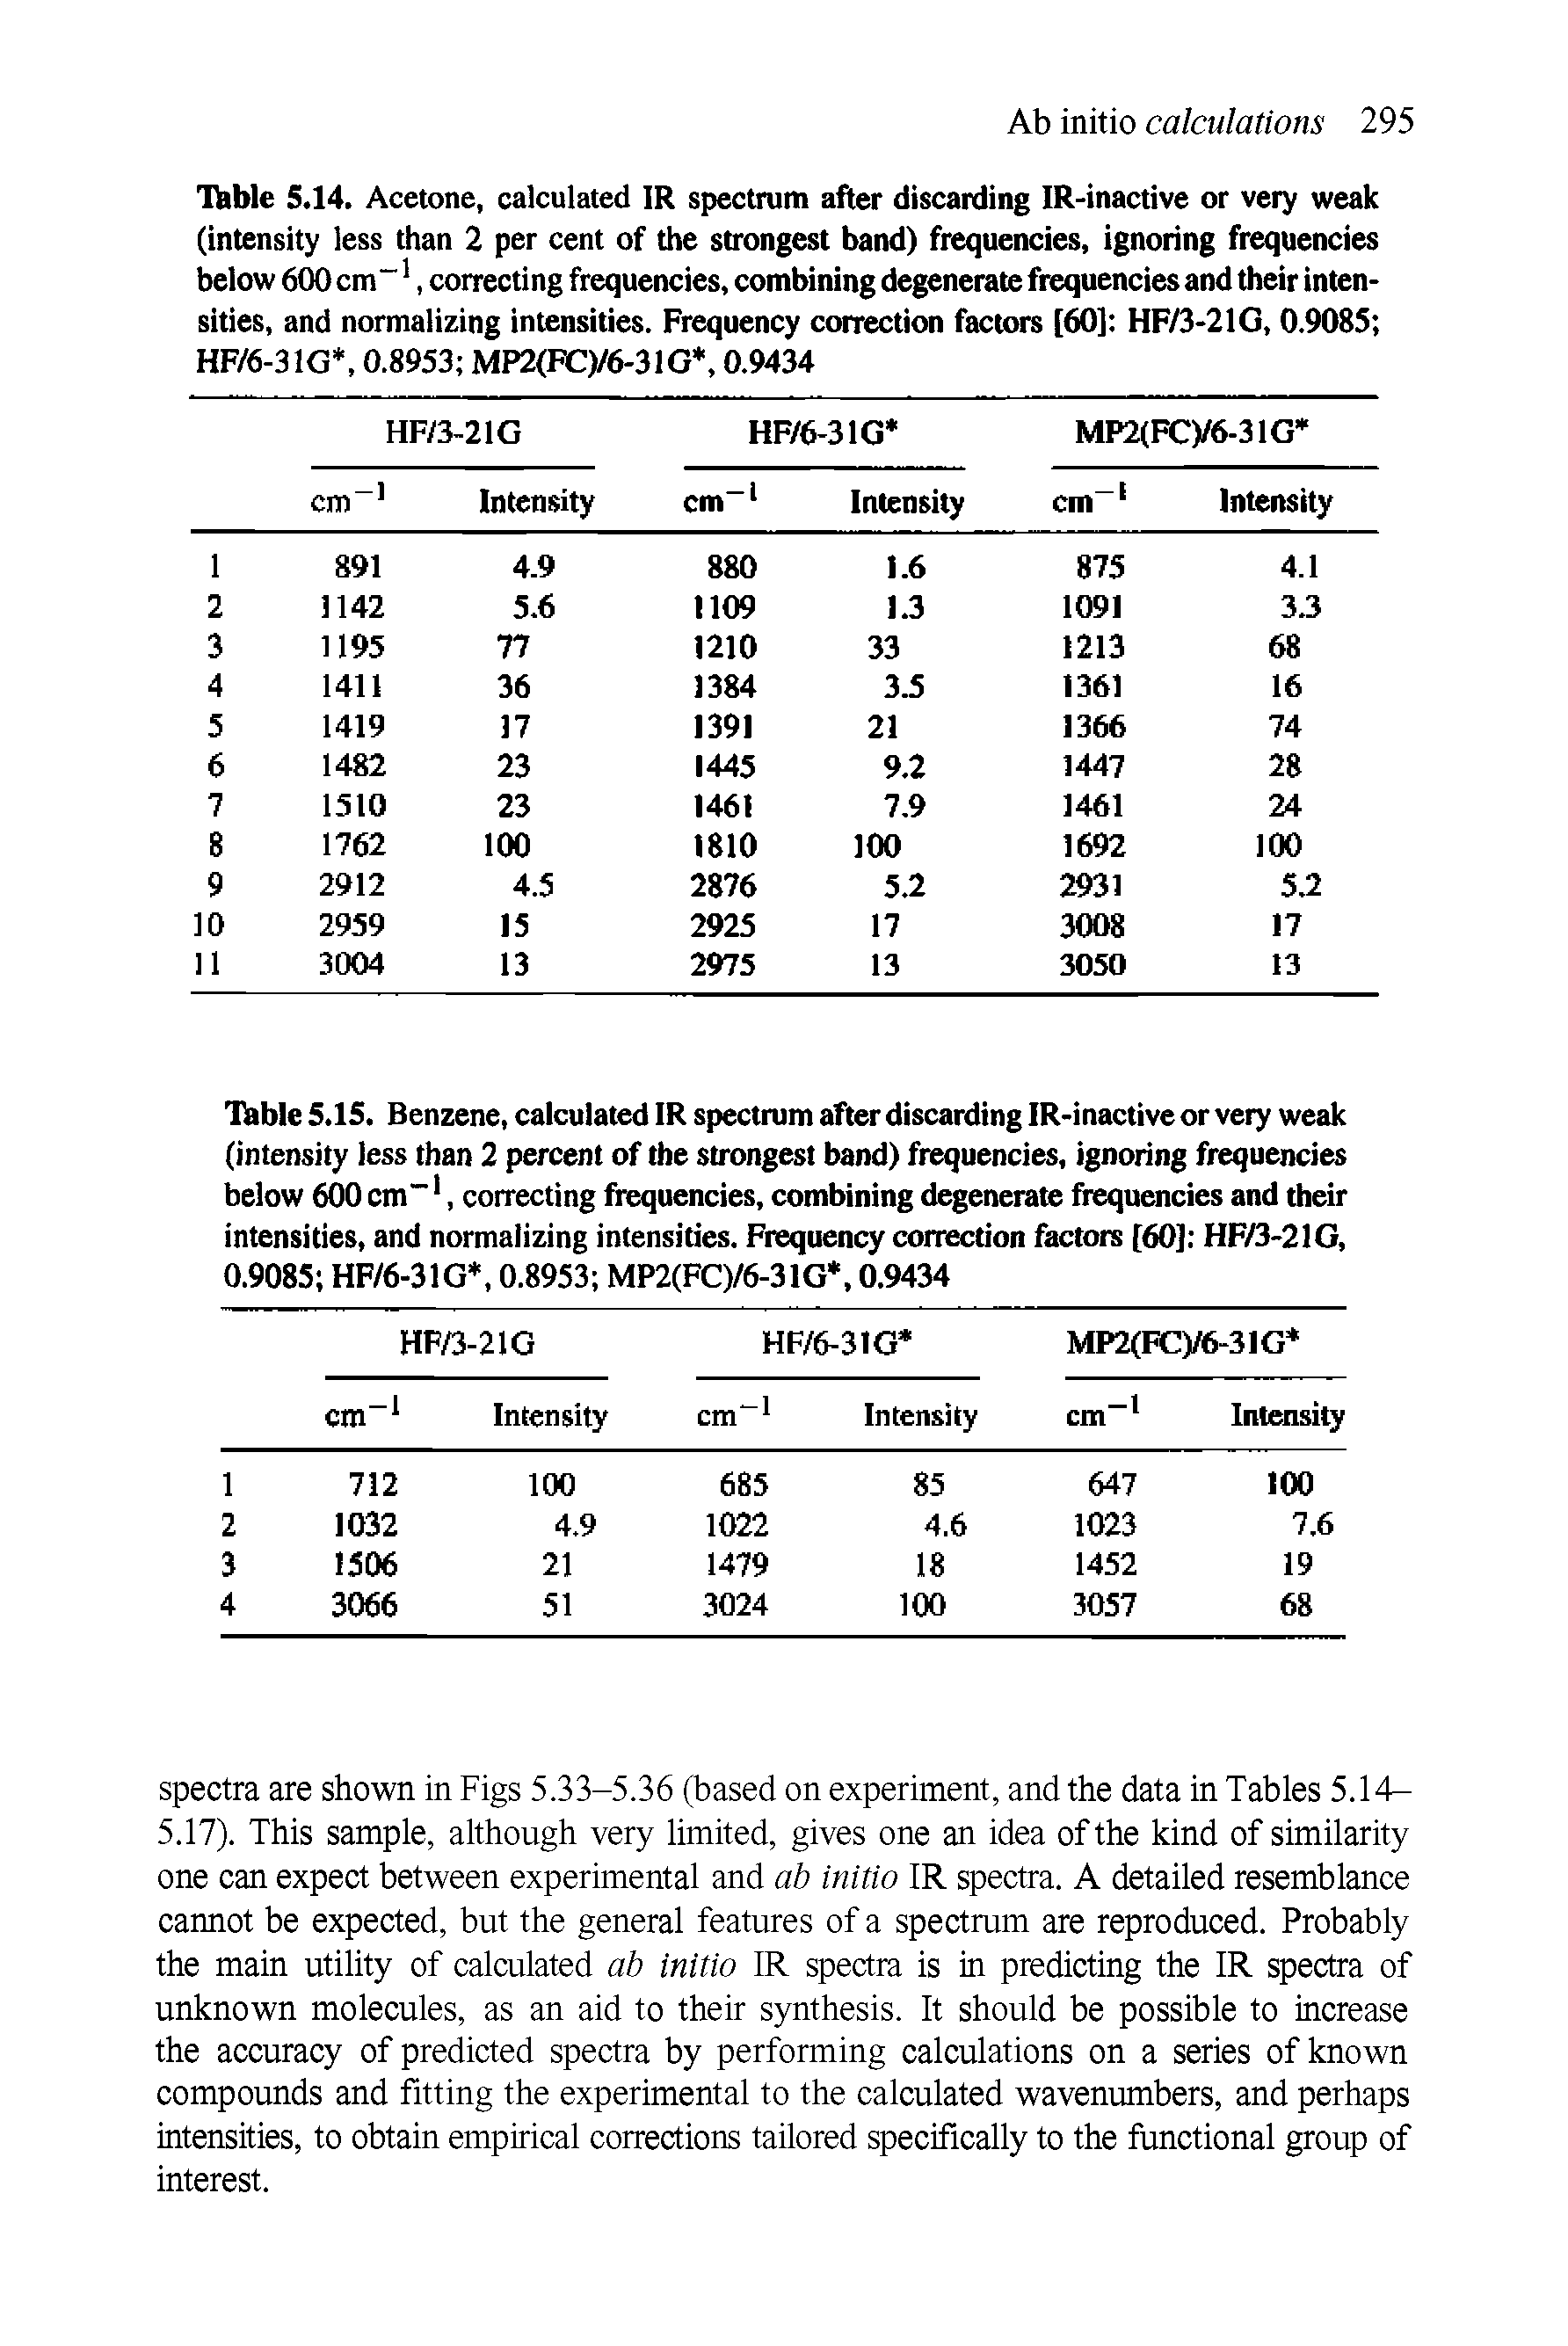 Table 5.15. Benzene, calculated IR spectrum after discarding IR-inactive or very weak (intensity less than 2 percent of the strongest band) frequencies, ignoring frequencies below 600 cm, correcting frequencies, combining degenerate ftequencies and their intensities, and normalizing intensities. Frequency correction factors [60] HF/3-21G, 0.9085 HF/6-31G, 0.8953 MP2(FC)/6-31G, 0.9434...